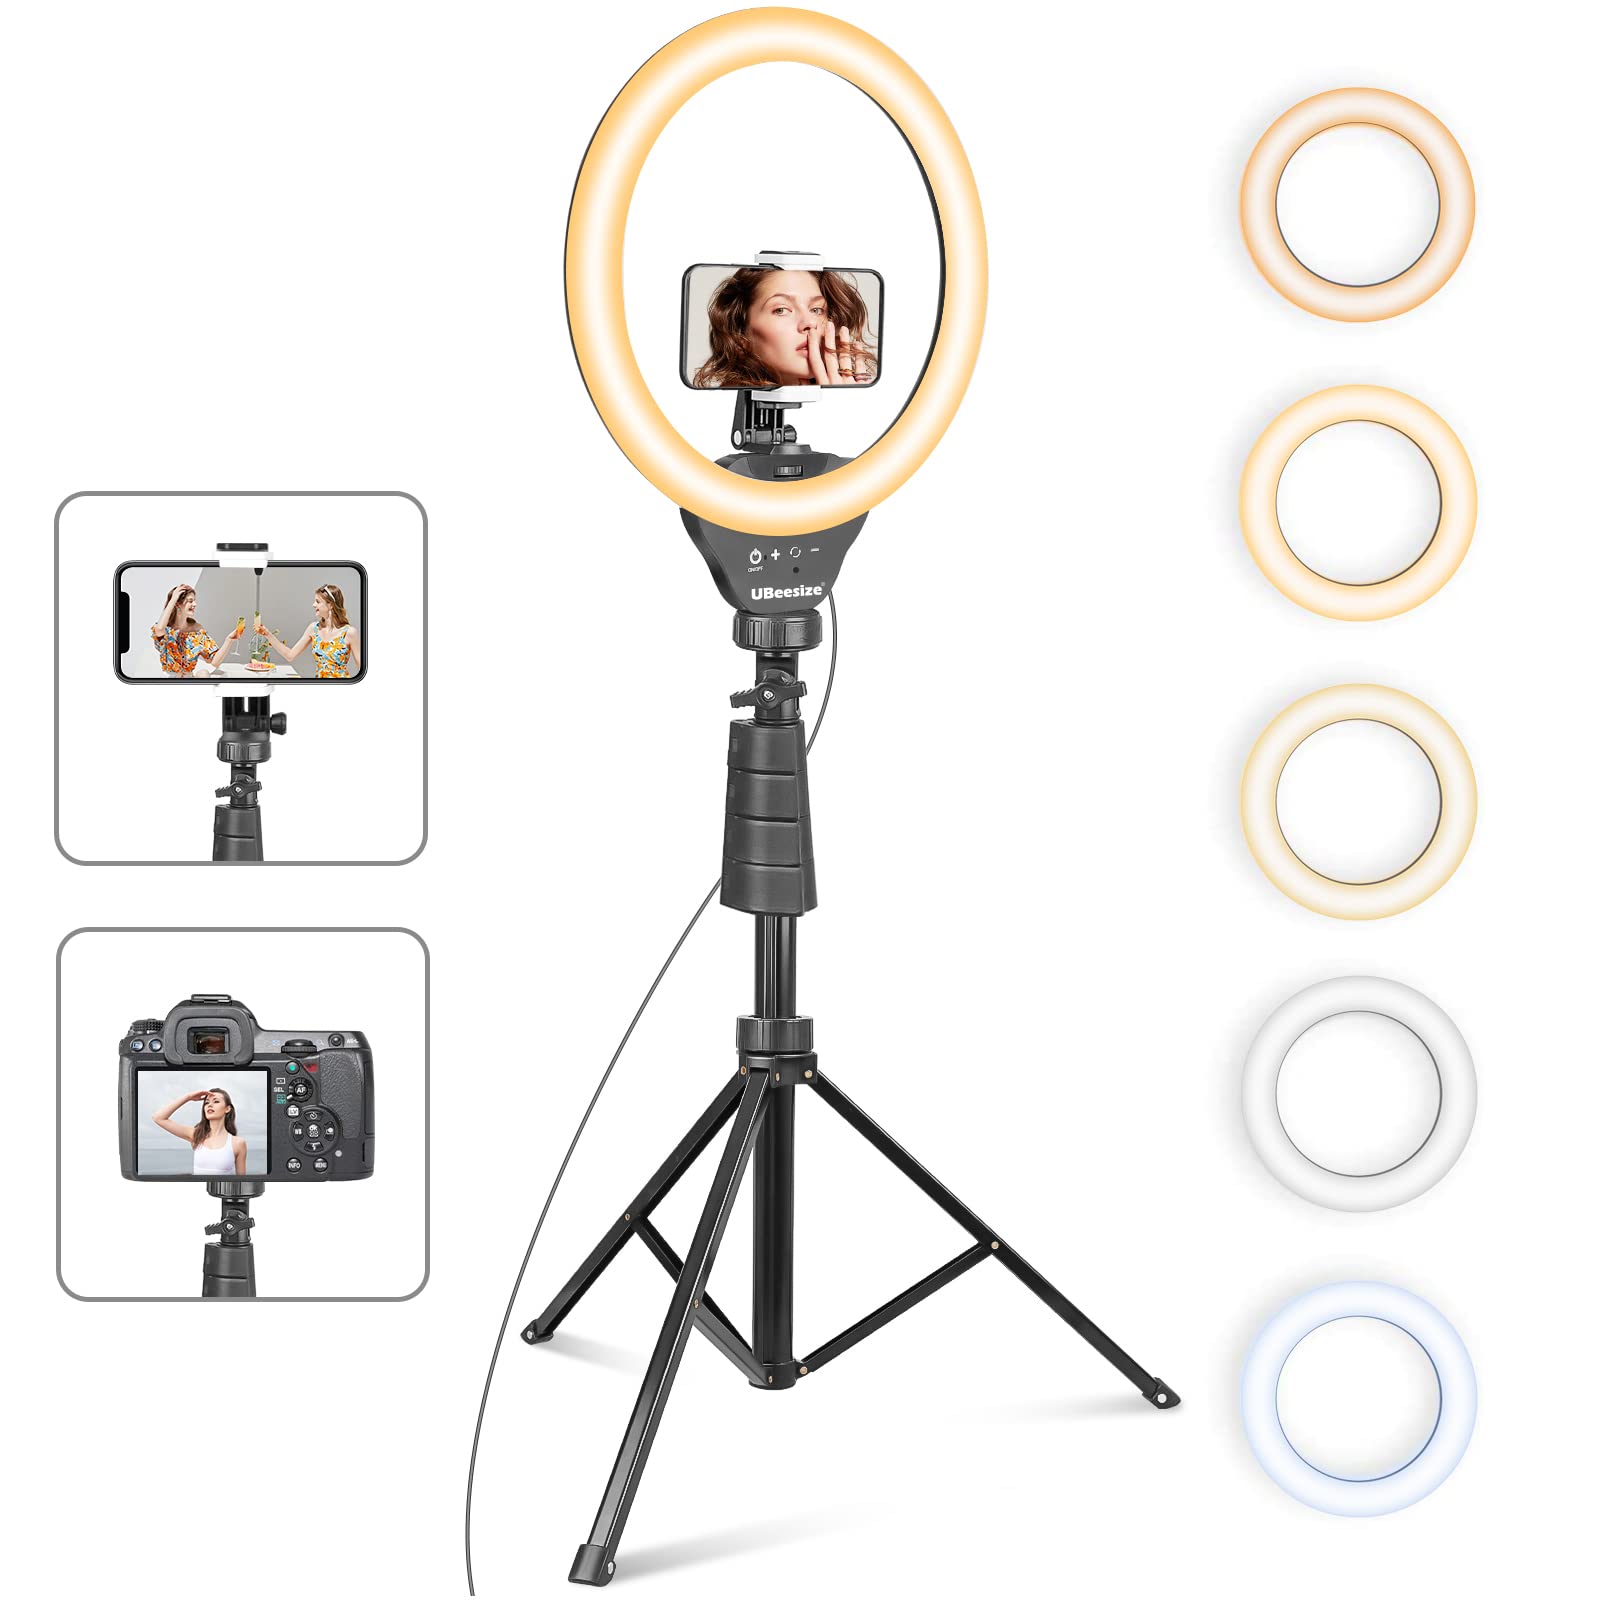 UBeesize 12’’ Selfie Ring Light with 62’’ Tripod Stand for Video Recording＆Live Streaming(YouTube, Instagram, TIK Tok), Compatible with Phones, Cameras and Webcams